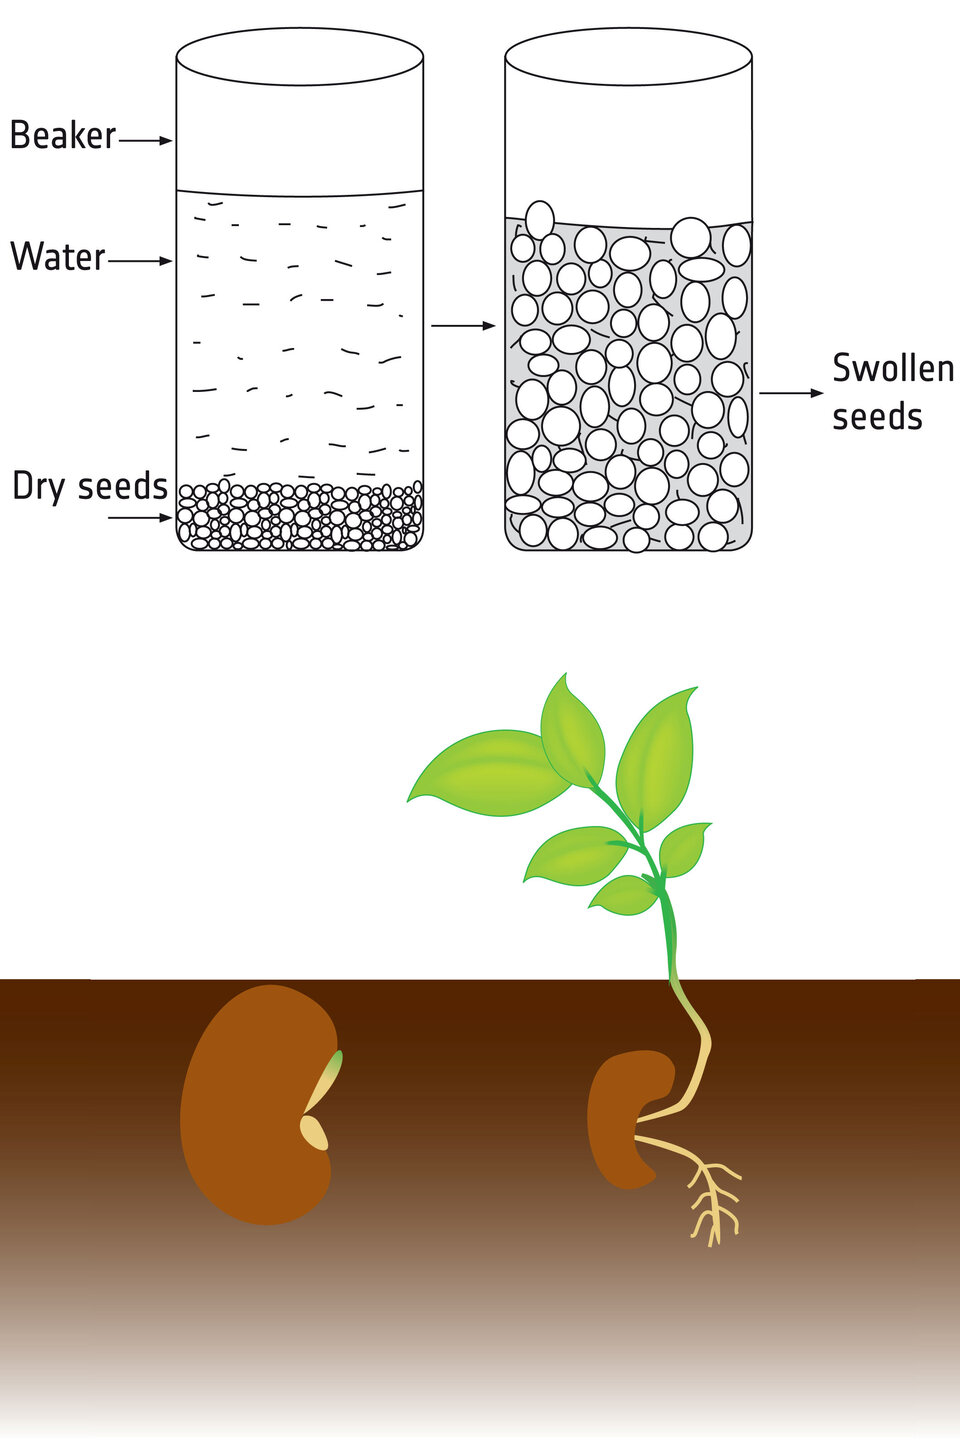 Seeds and plants